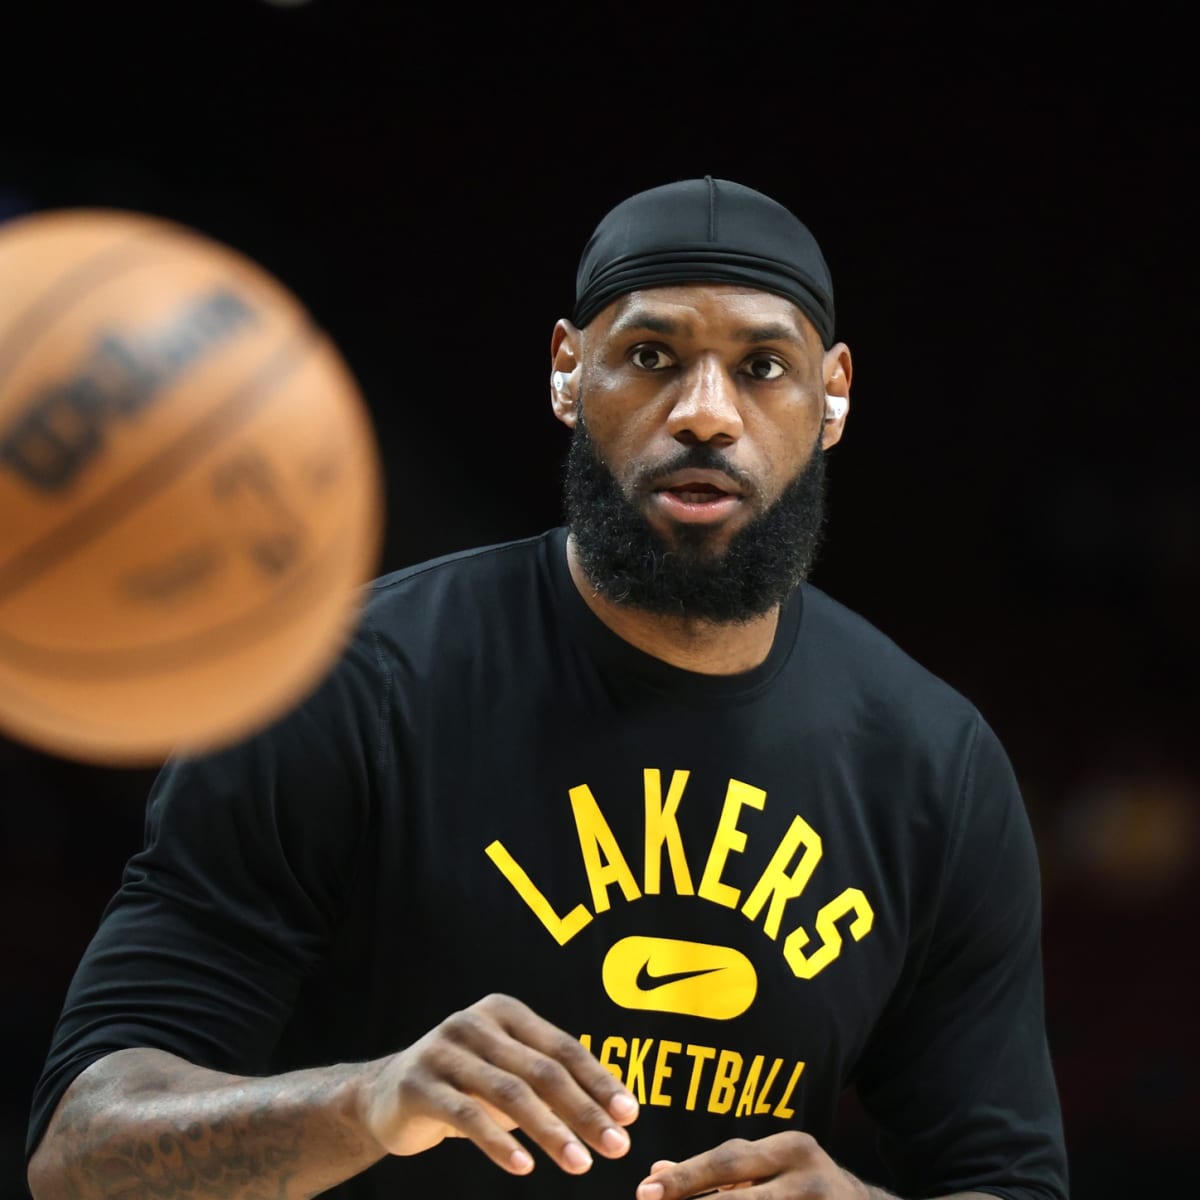 Lakers News: Former LA Forward Claims LeBron James Downplays Actual Height,  Weight - All Lakers